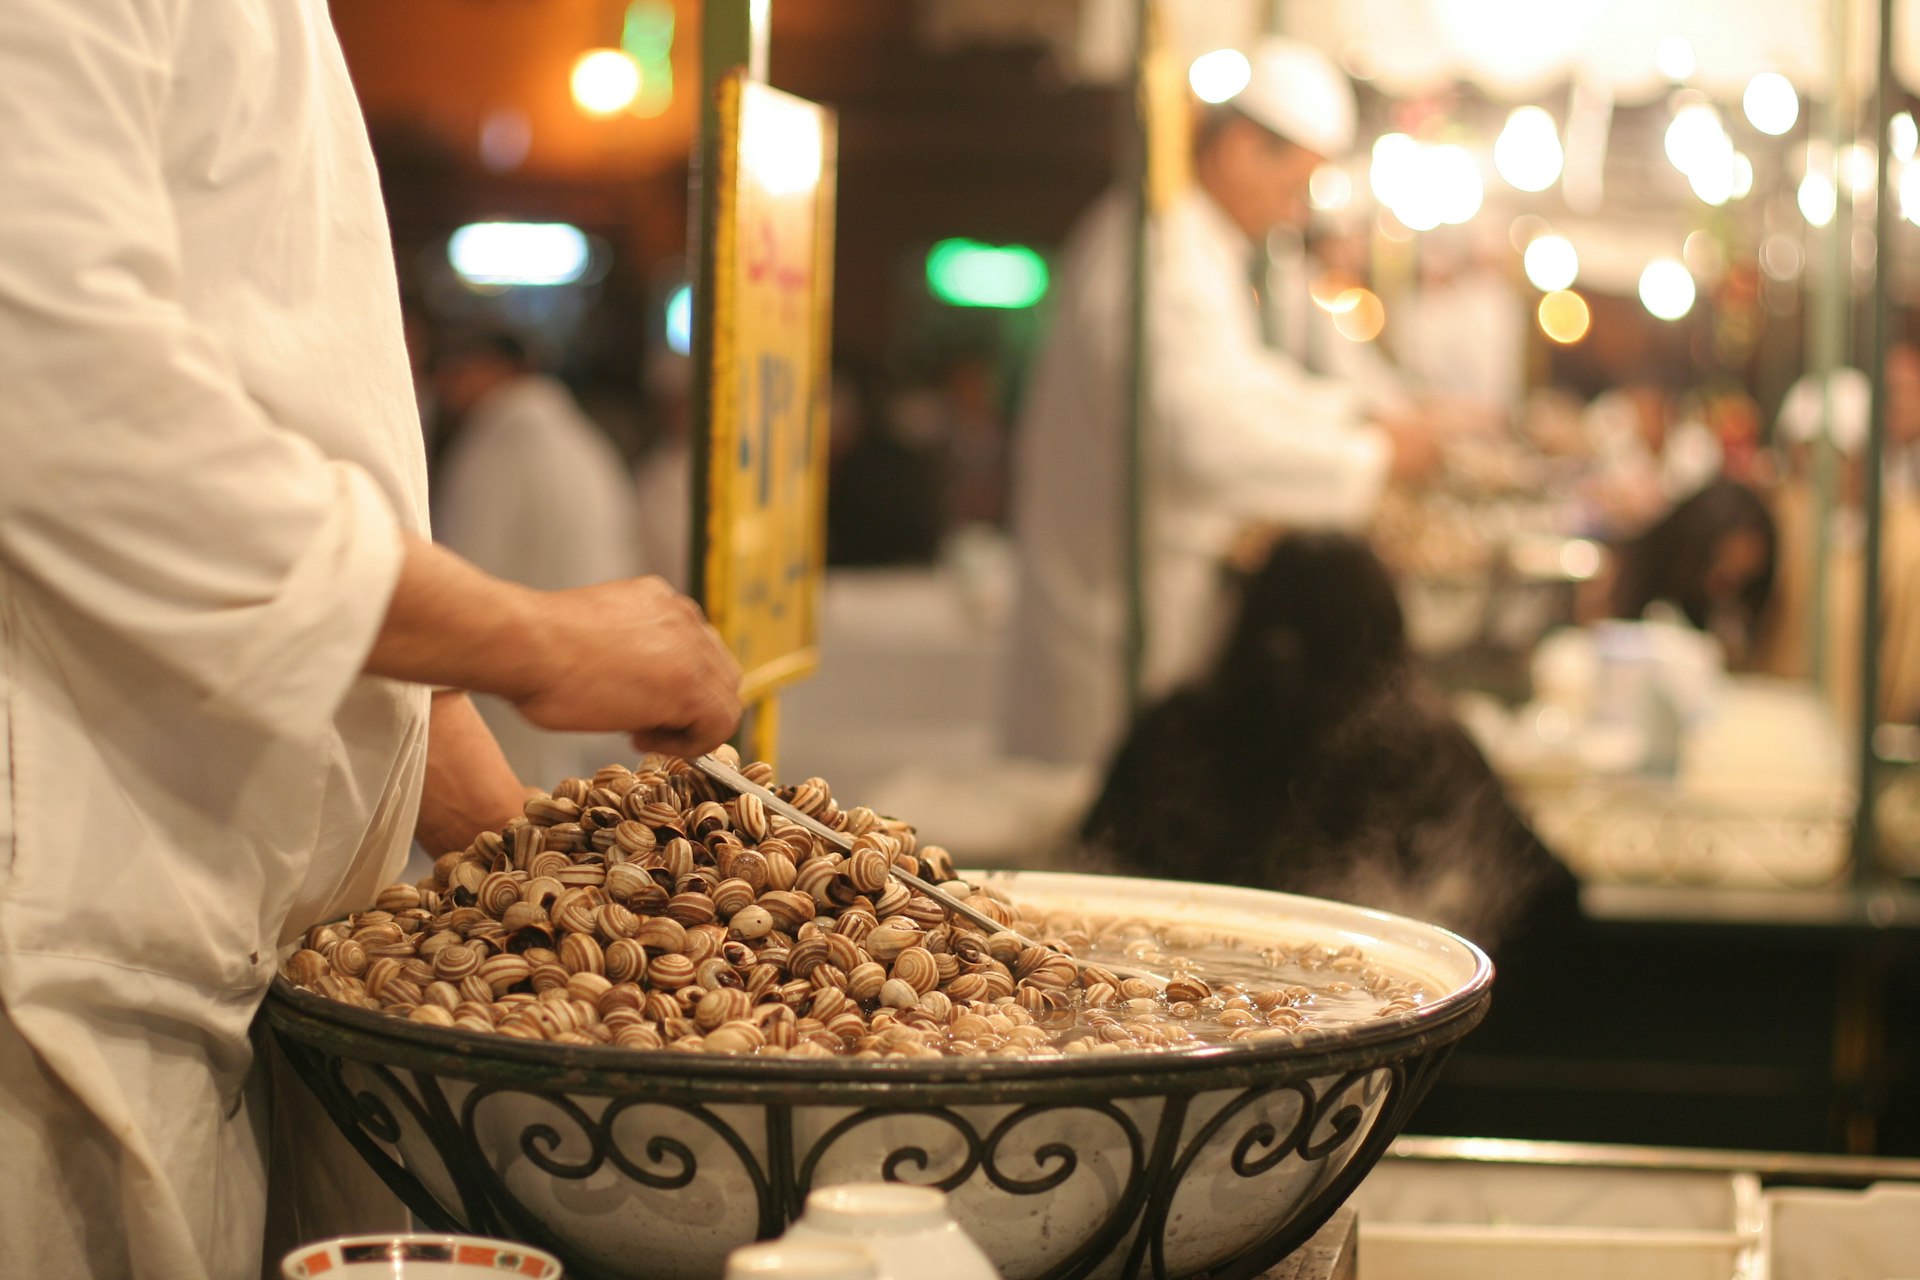 A pair of hands stirs snails in a large bowl at a food stall in Morocco 